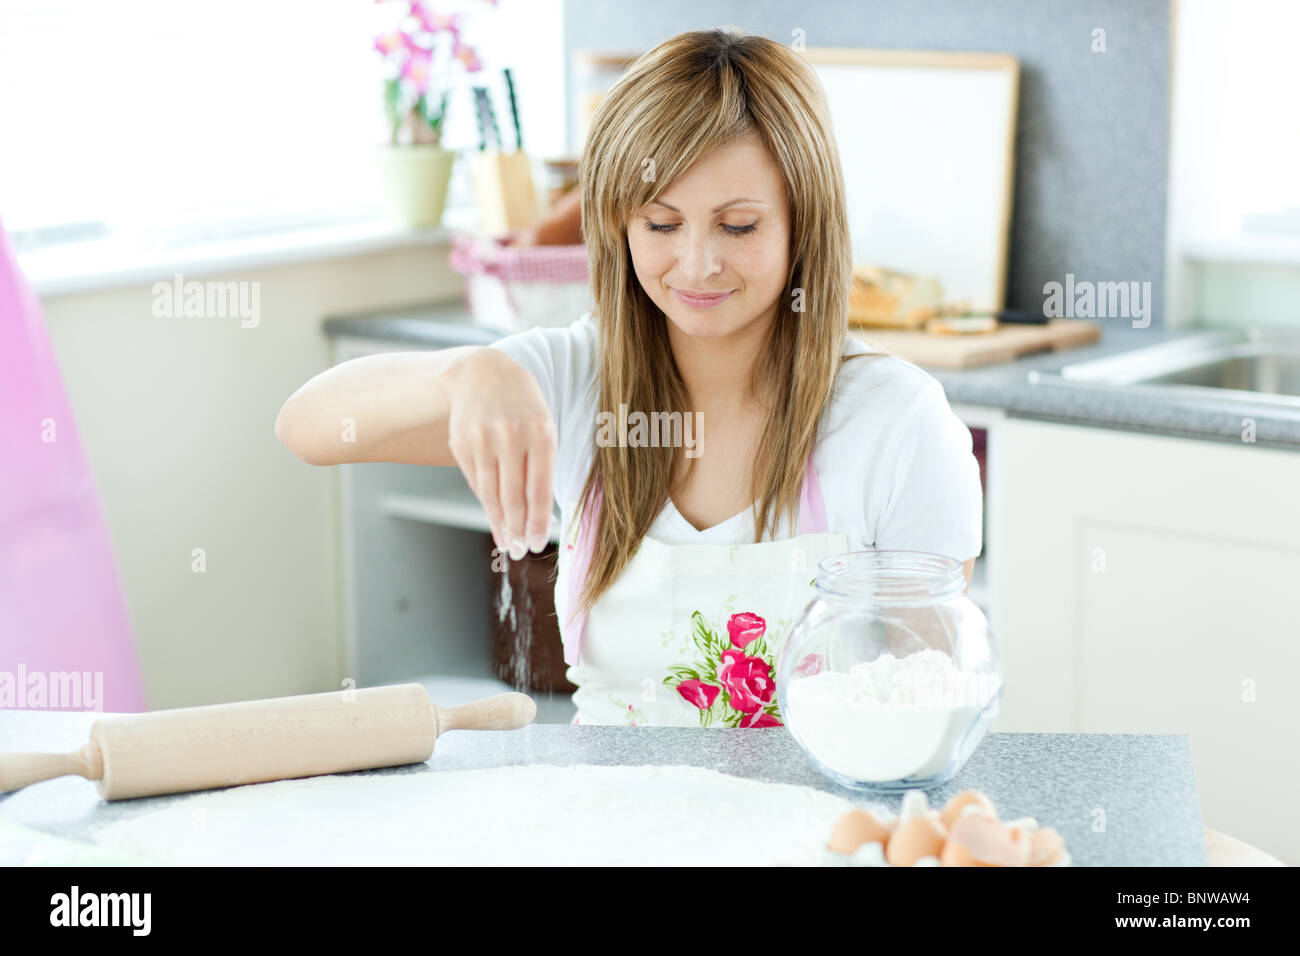 Portrait of a cute woman preparing a cake in the kitchen Stock Photo